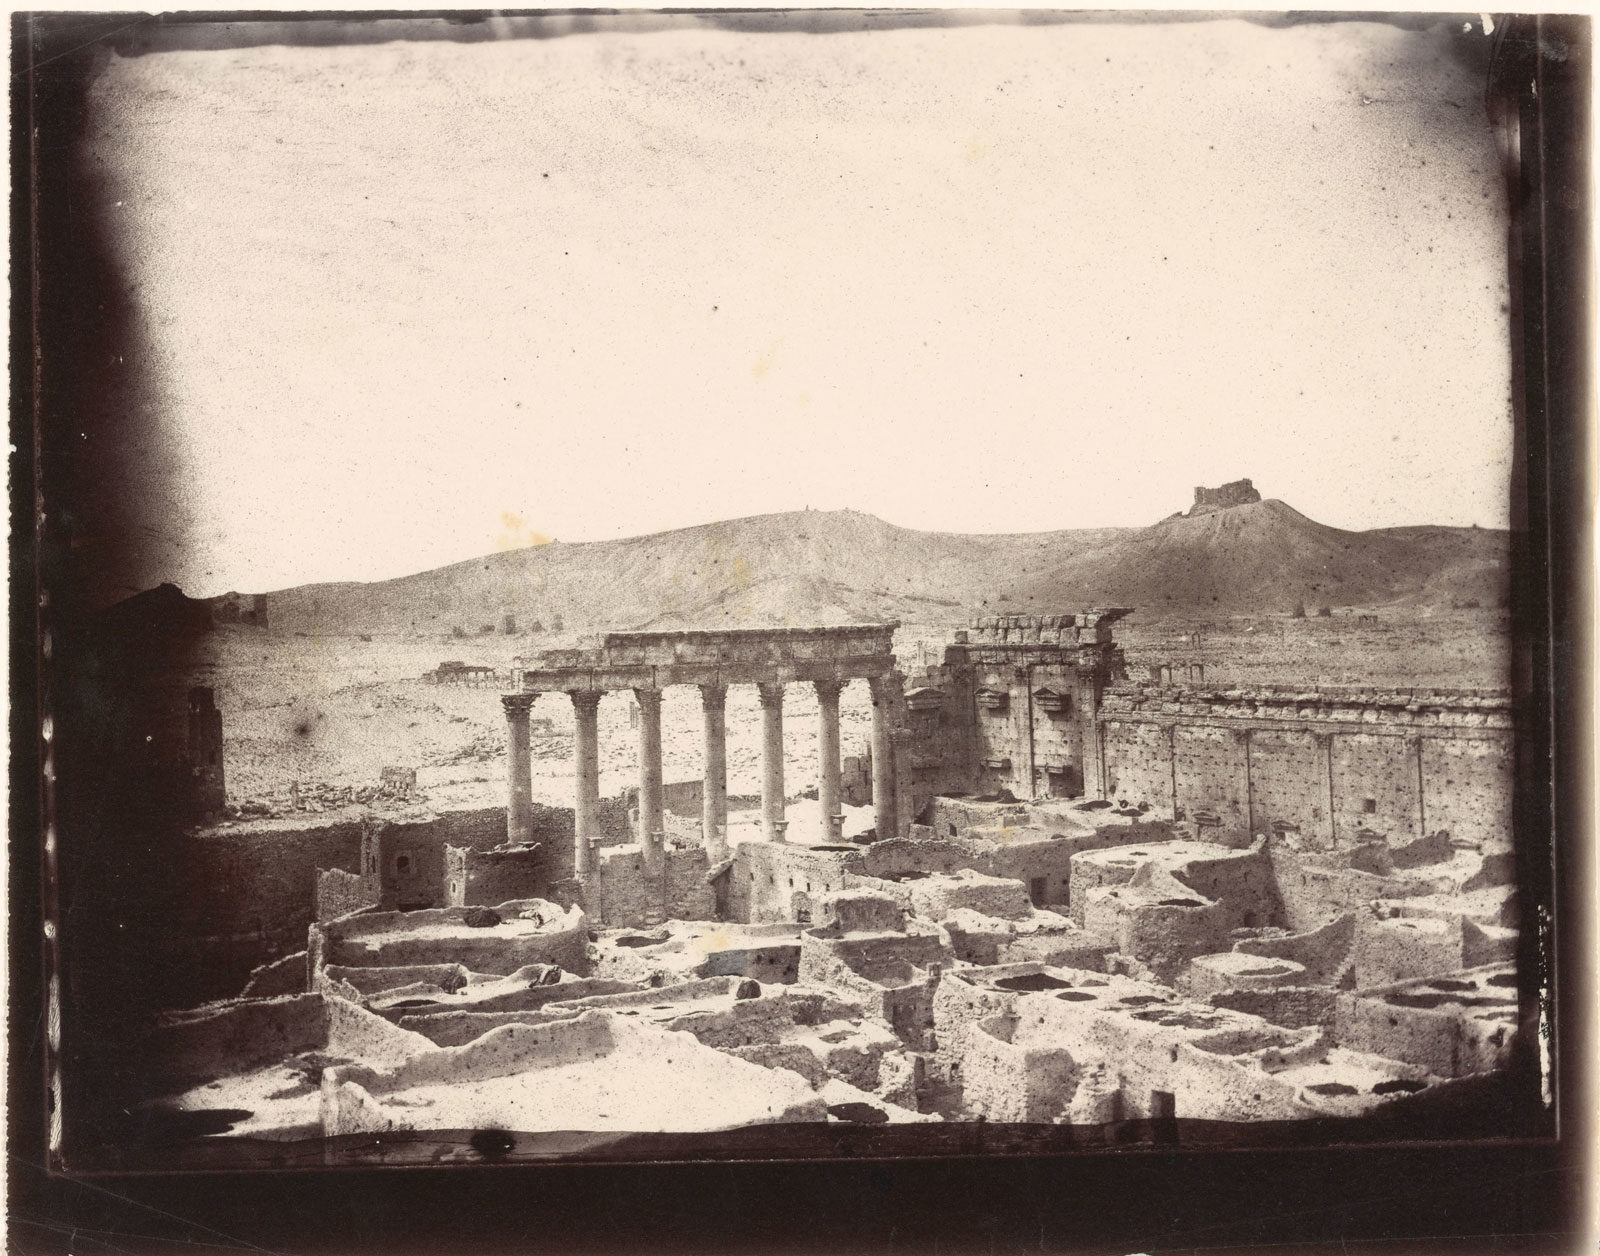 The northwest corner of the courtyard of the Temple of Bel, Palmyra, photographed by Louis Vines, 1864